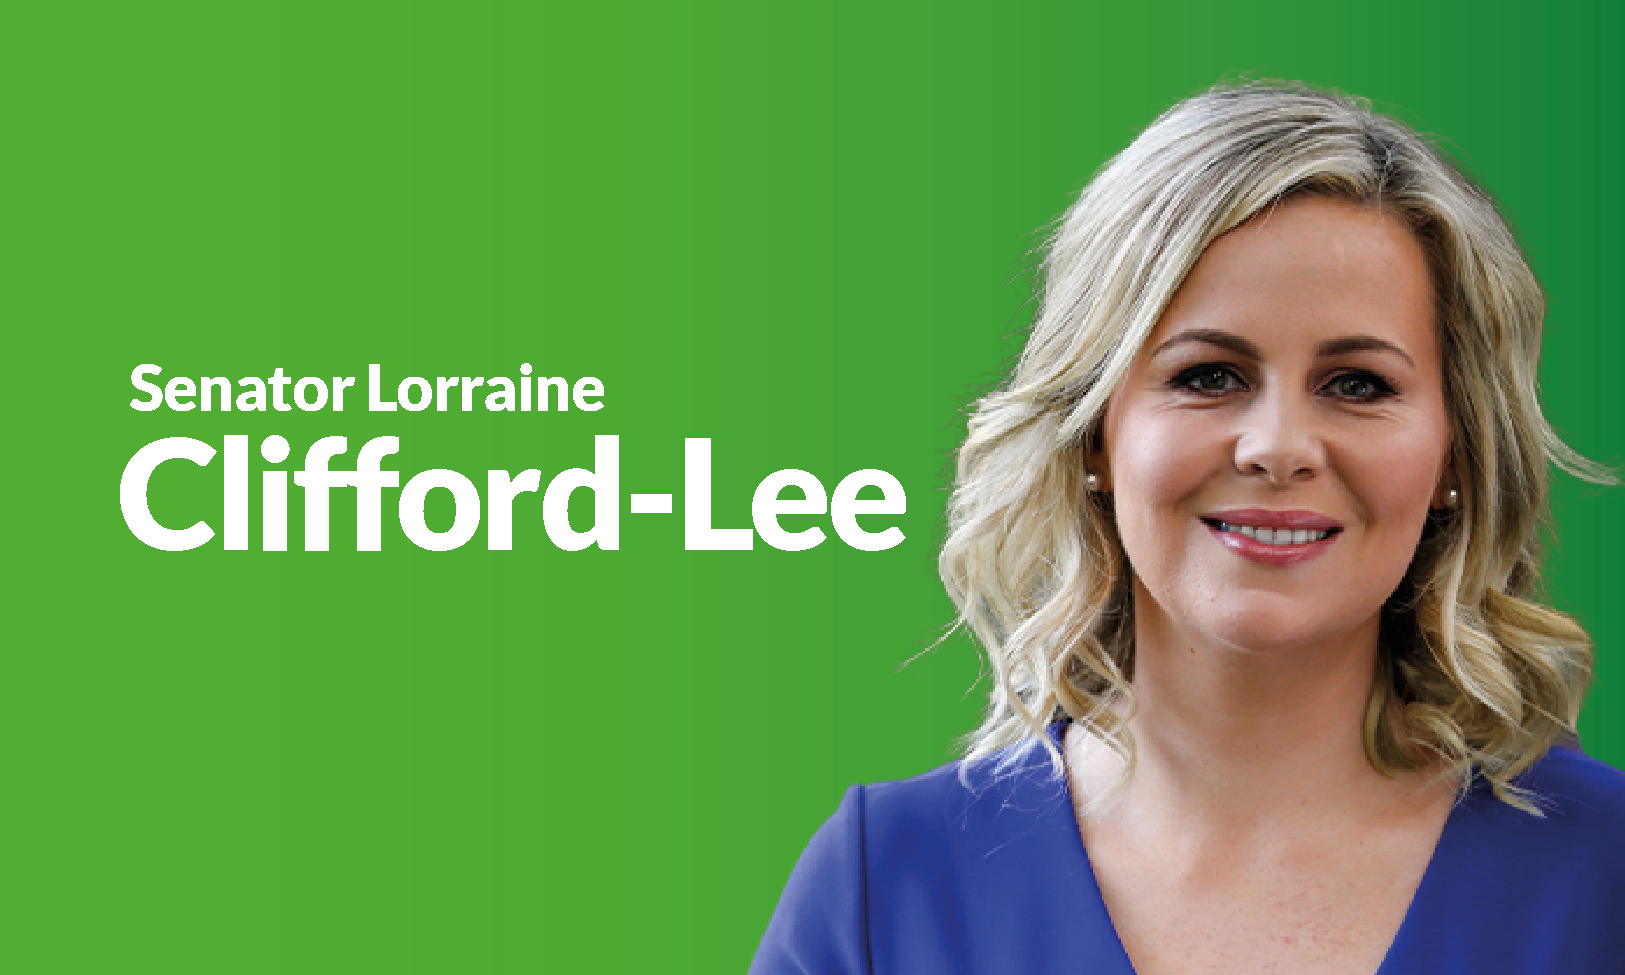 Clifford-Lee calls on the HSE to publish all public health campaigns in Irish